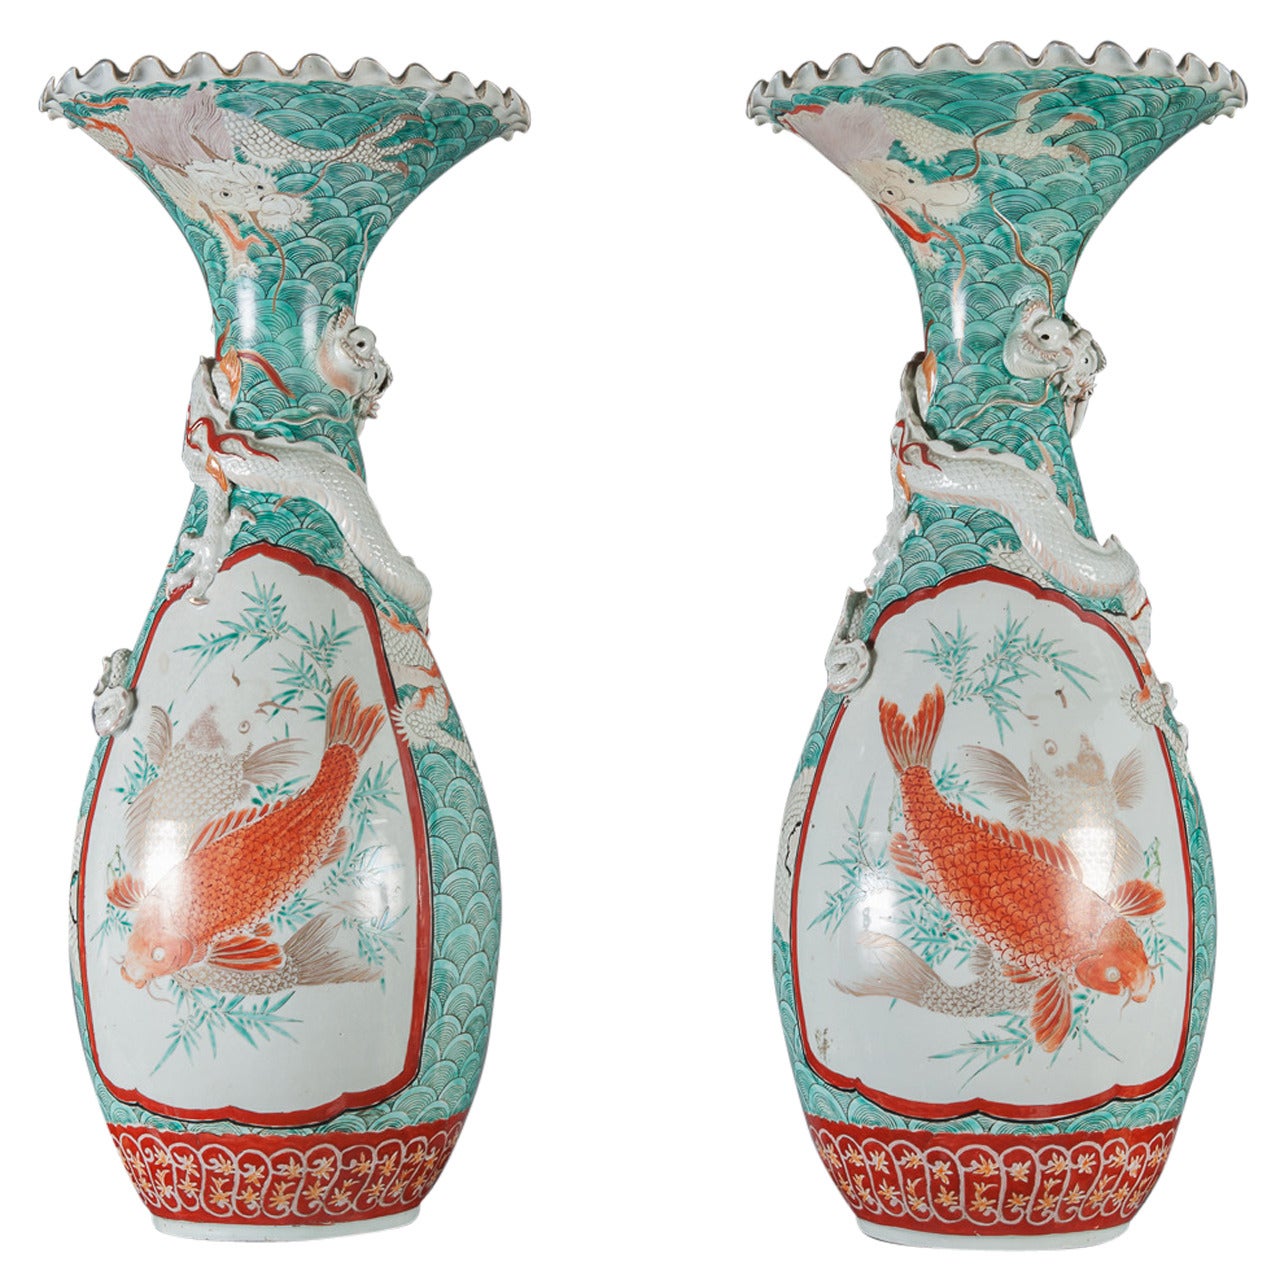 A Pair of Antique Japanese Porcelain Vases with Dragon Motif